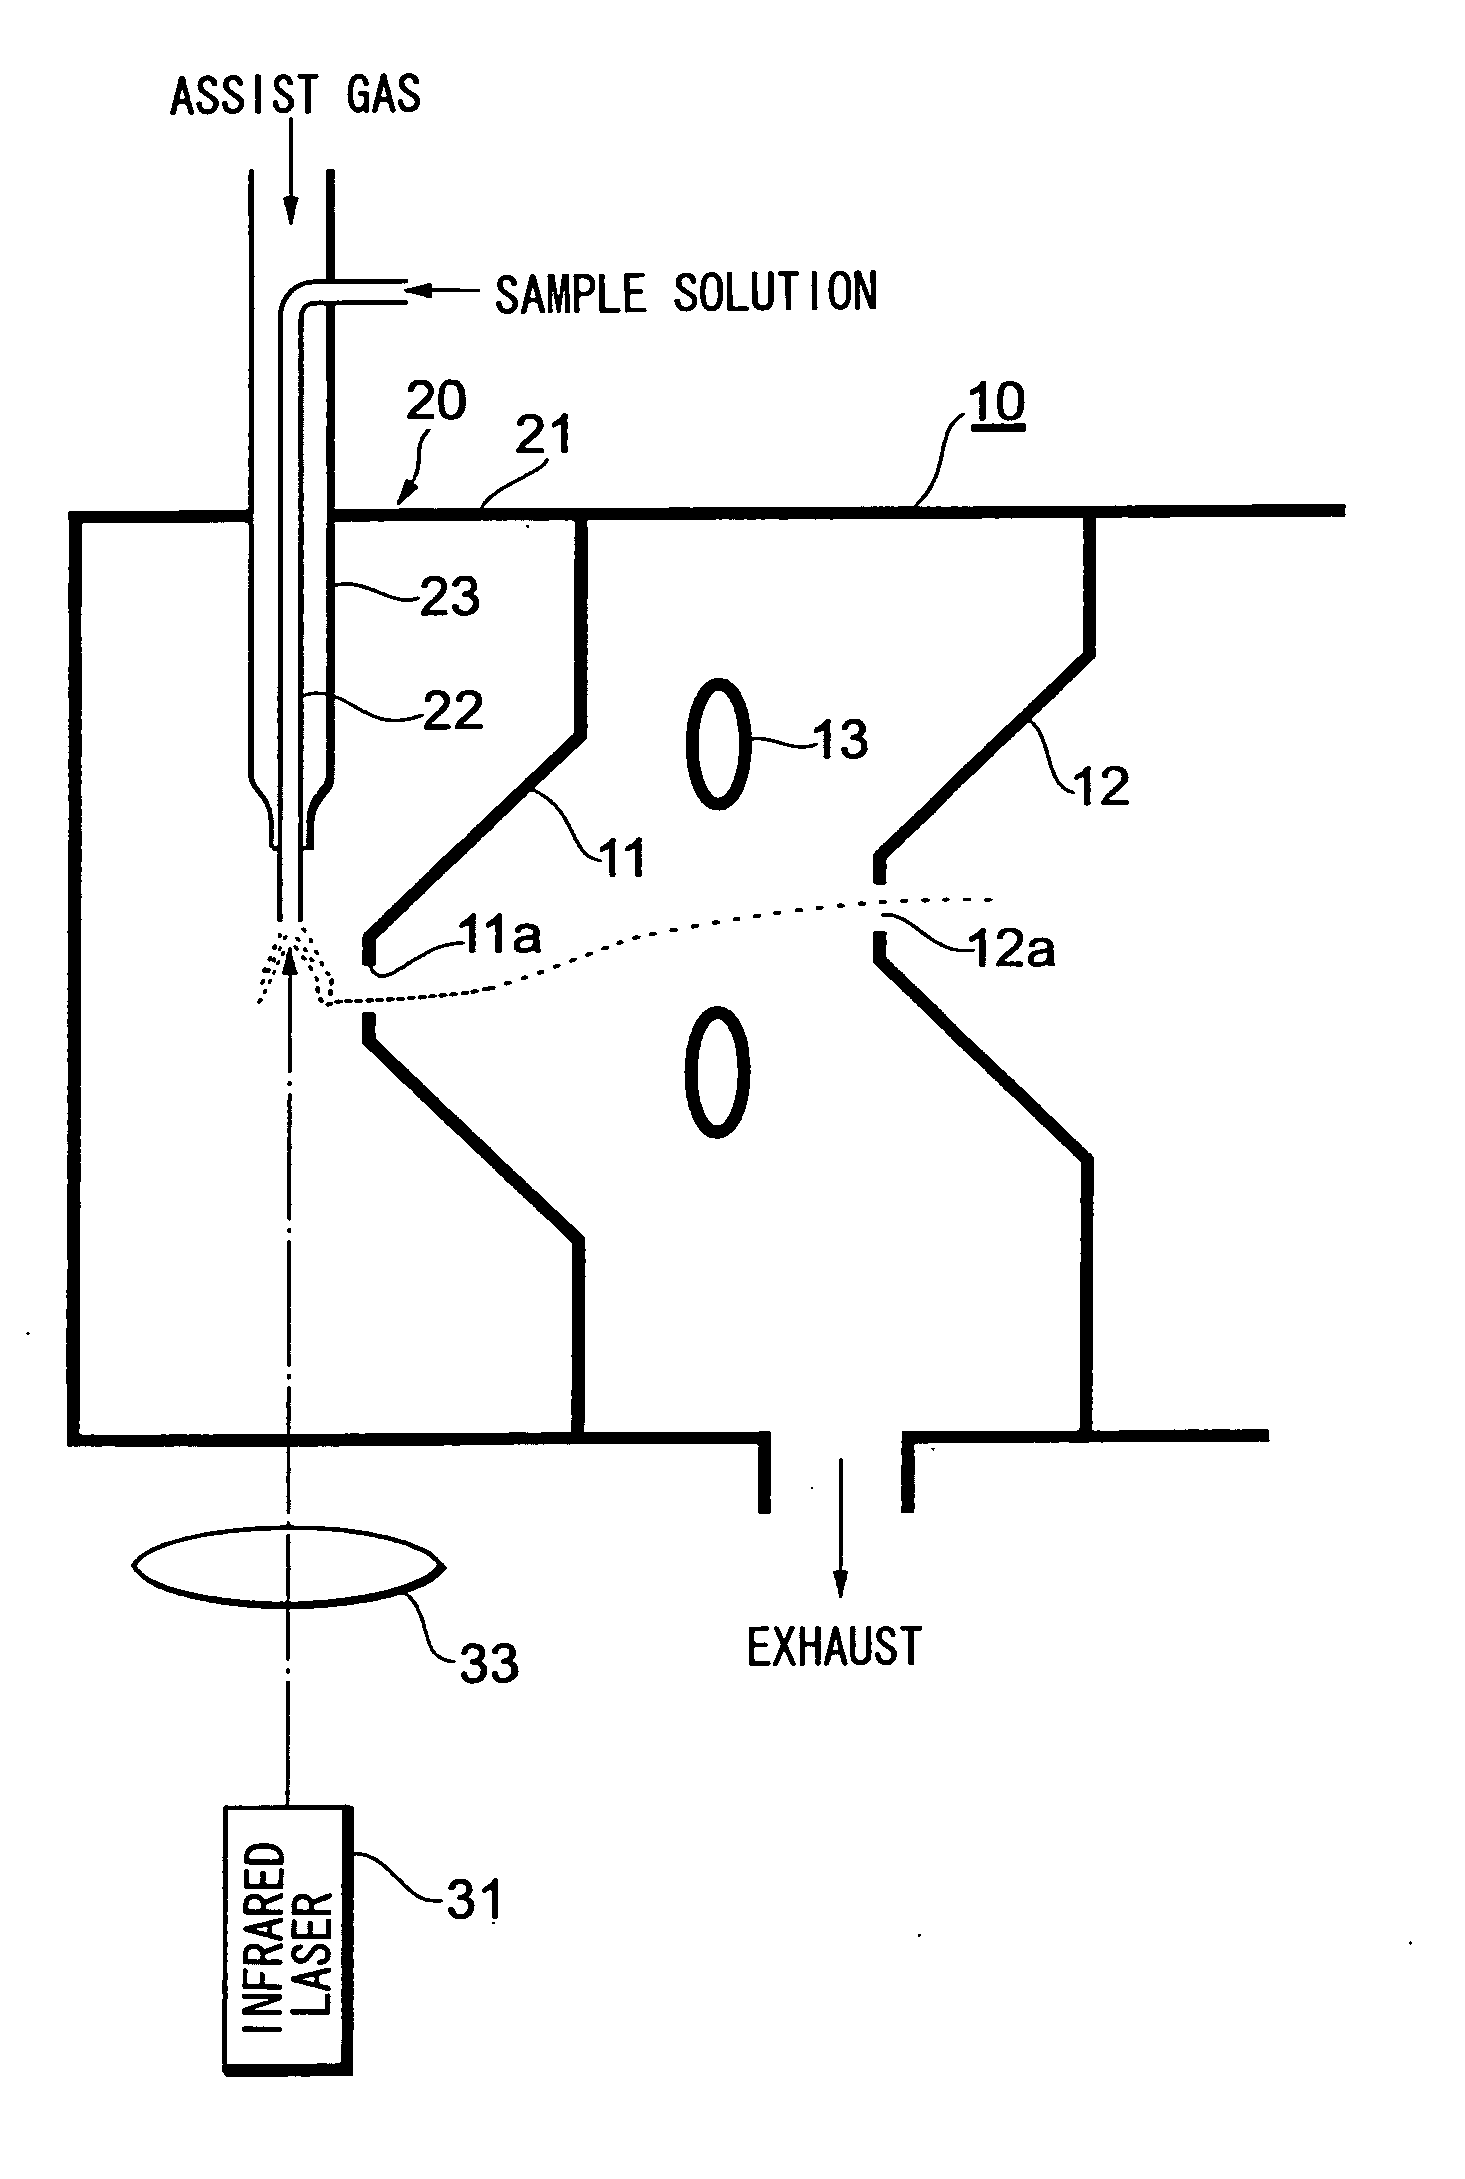 Method and apparatus for selectively severing and analyzing non-covalent and other bonds of biological macromolecules